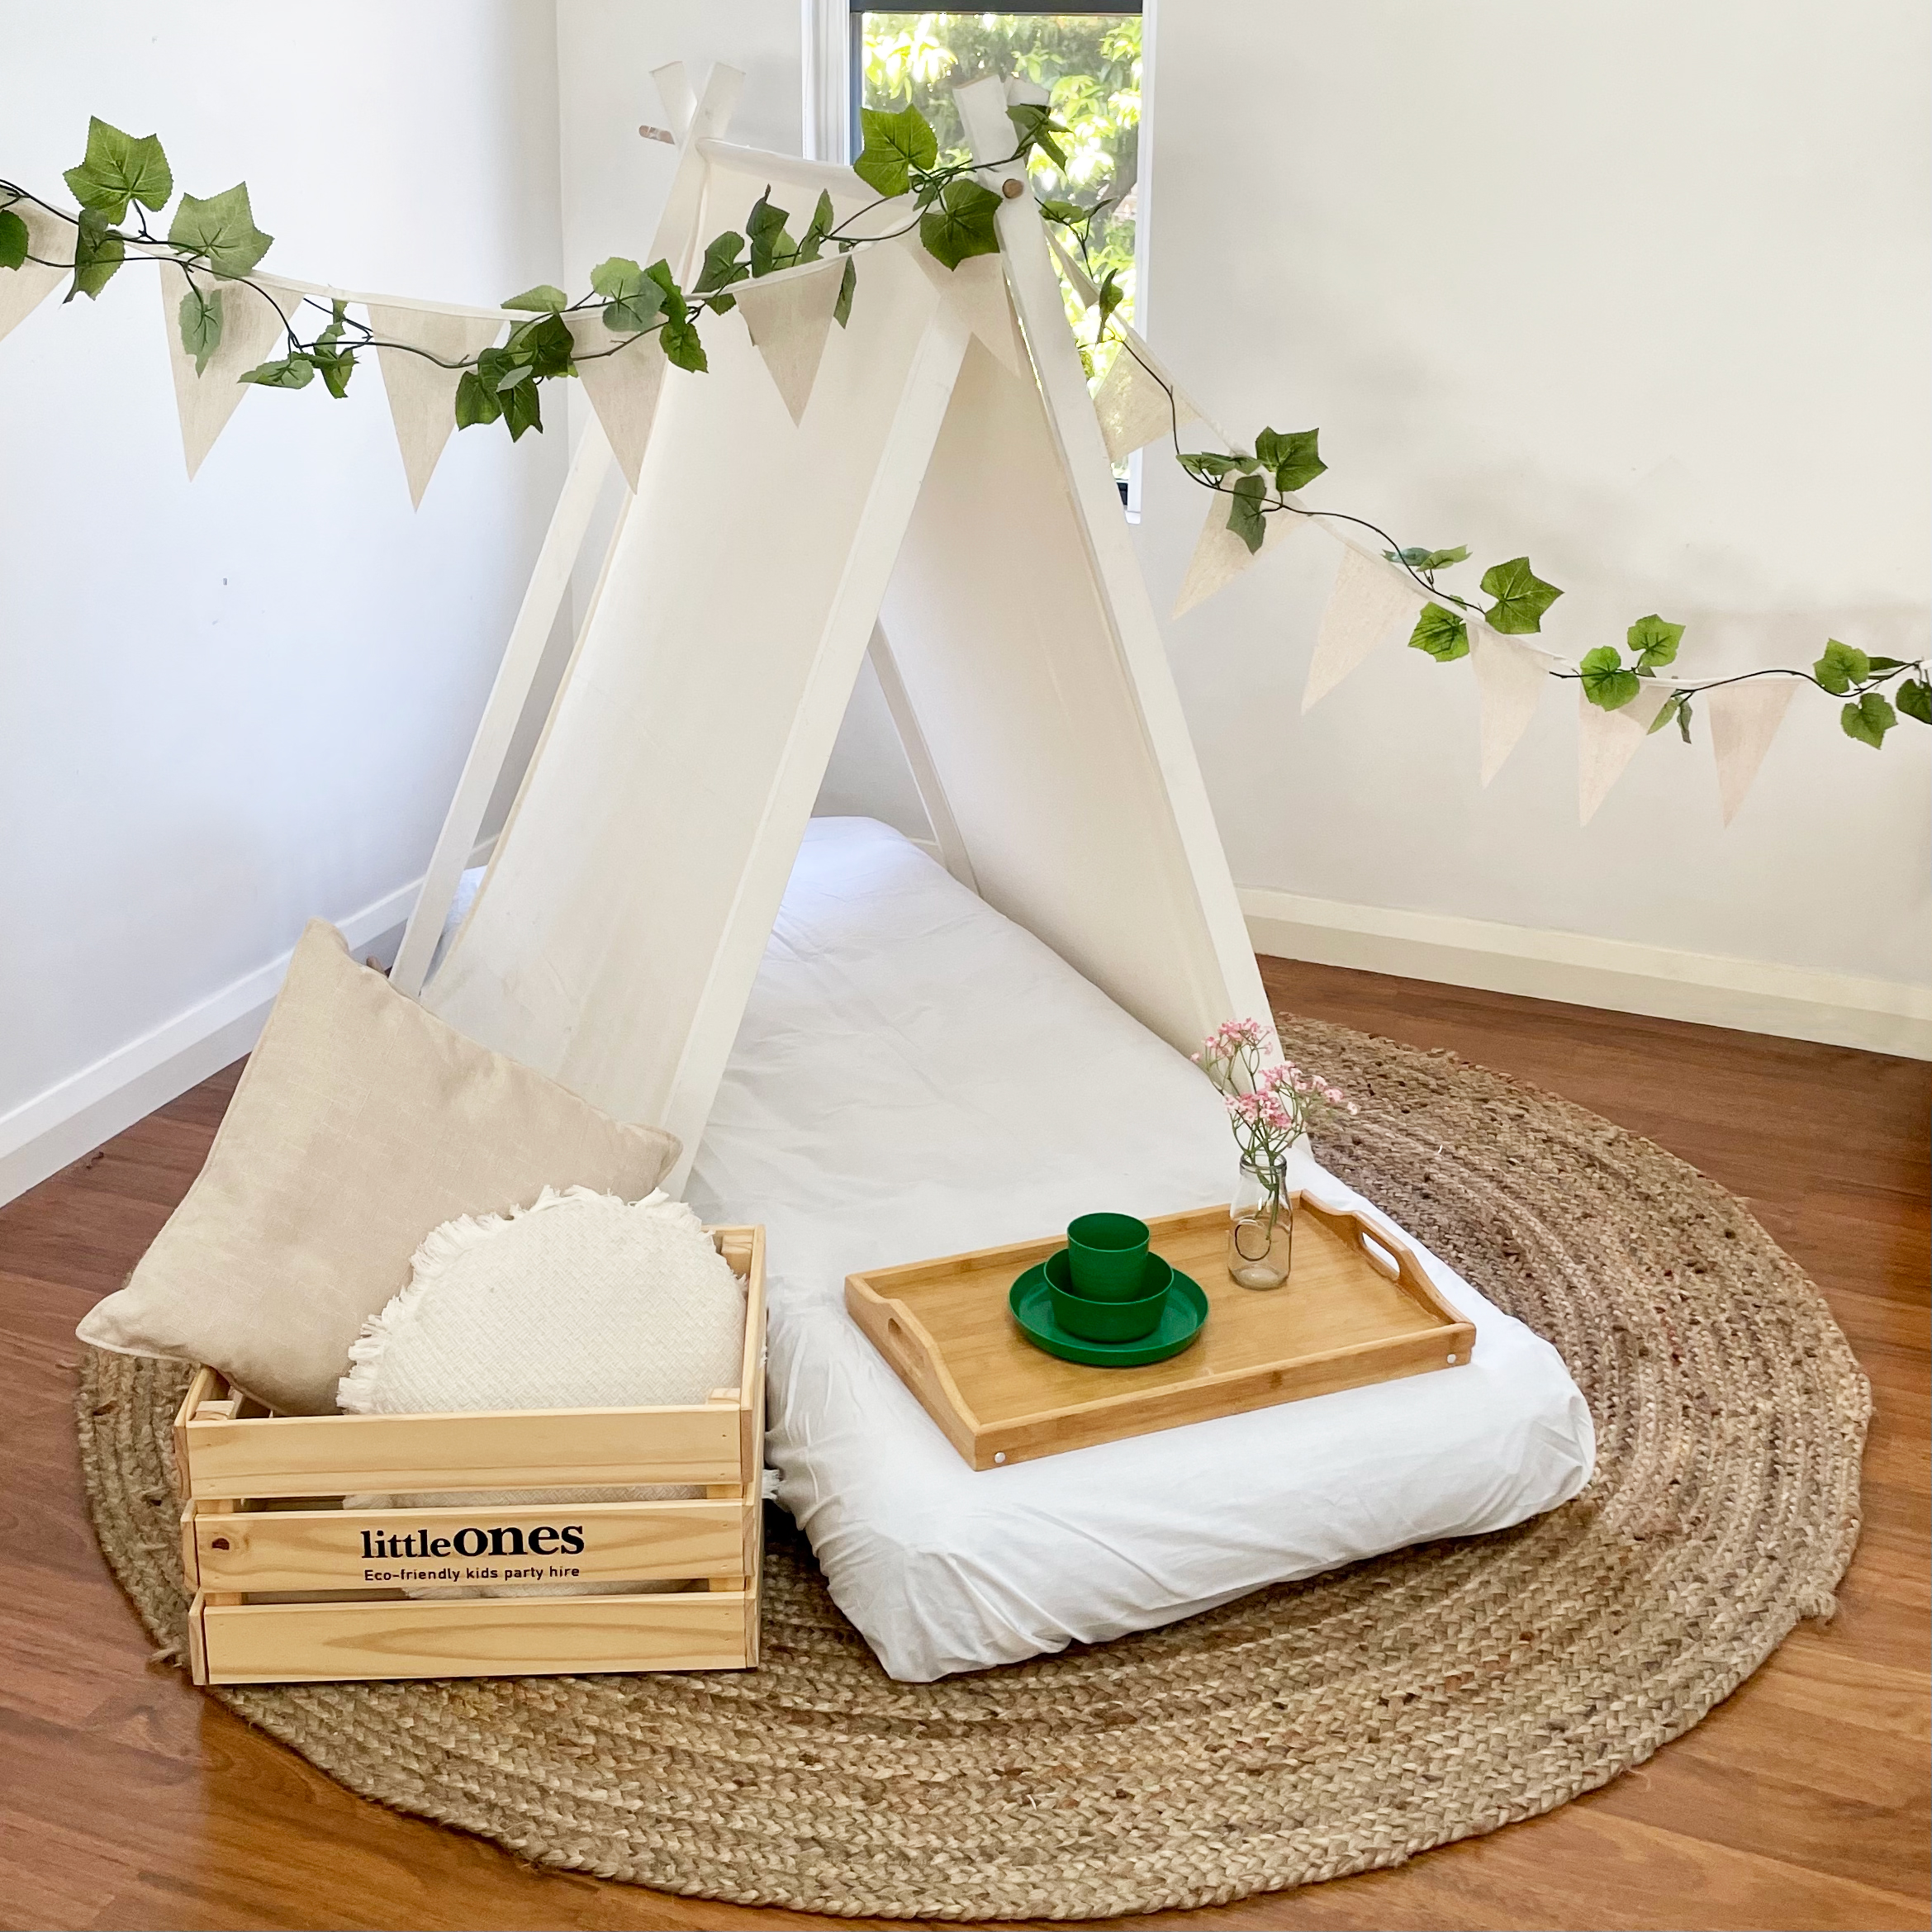 Little Ones Party Hire_green themed teepee.JPG